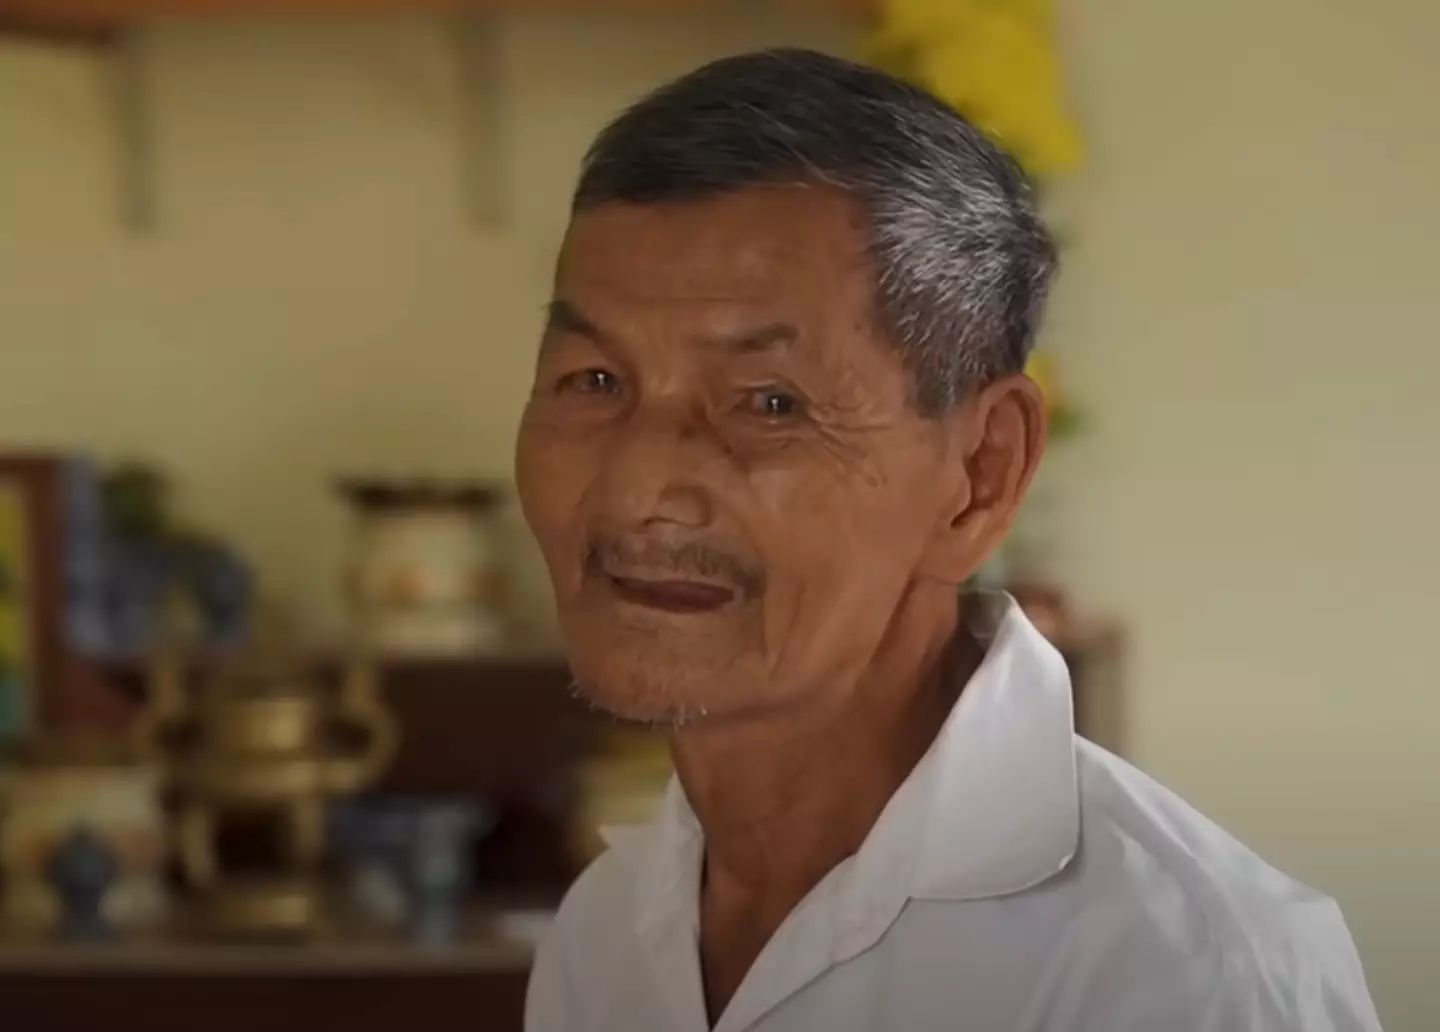 Thai Ngoc lives in a small village in Vietnam and in over 60 years he has barely slept a wink.